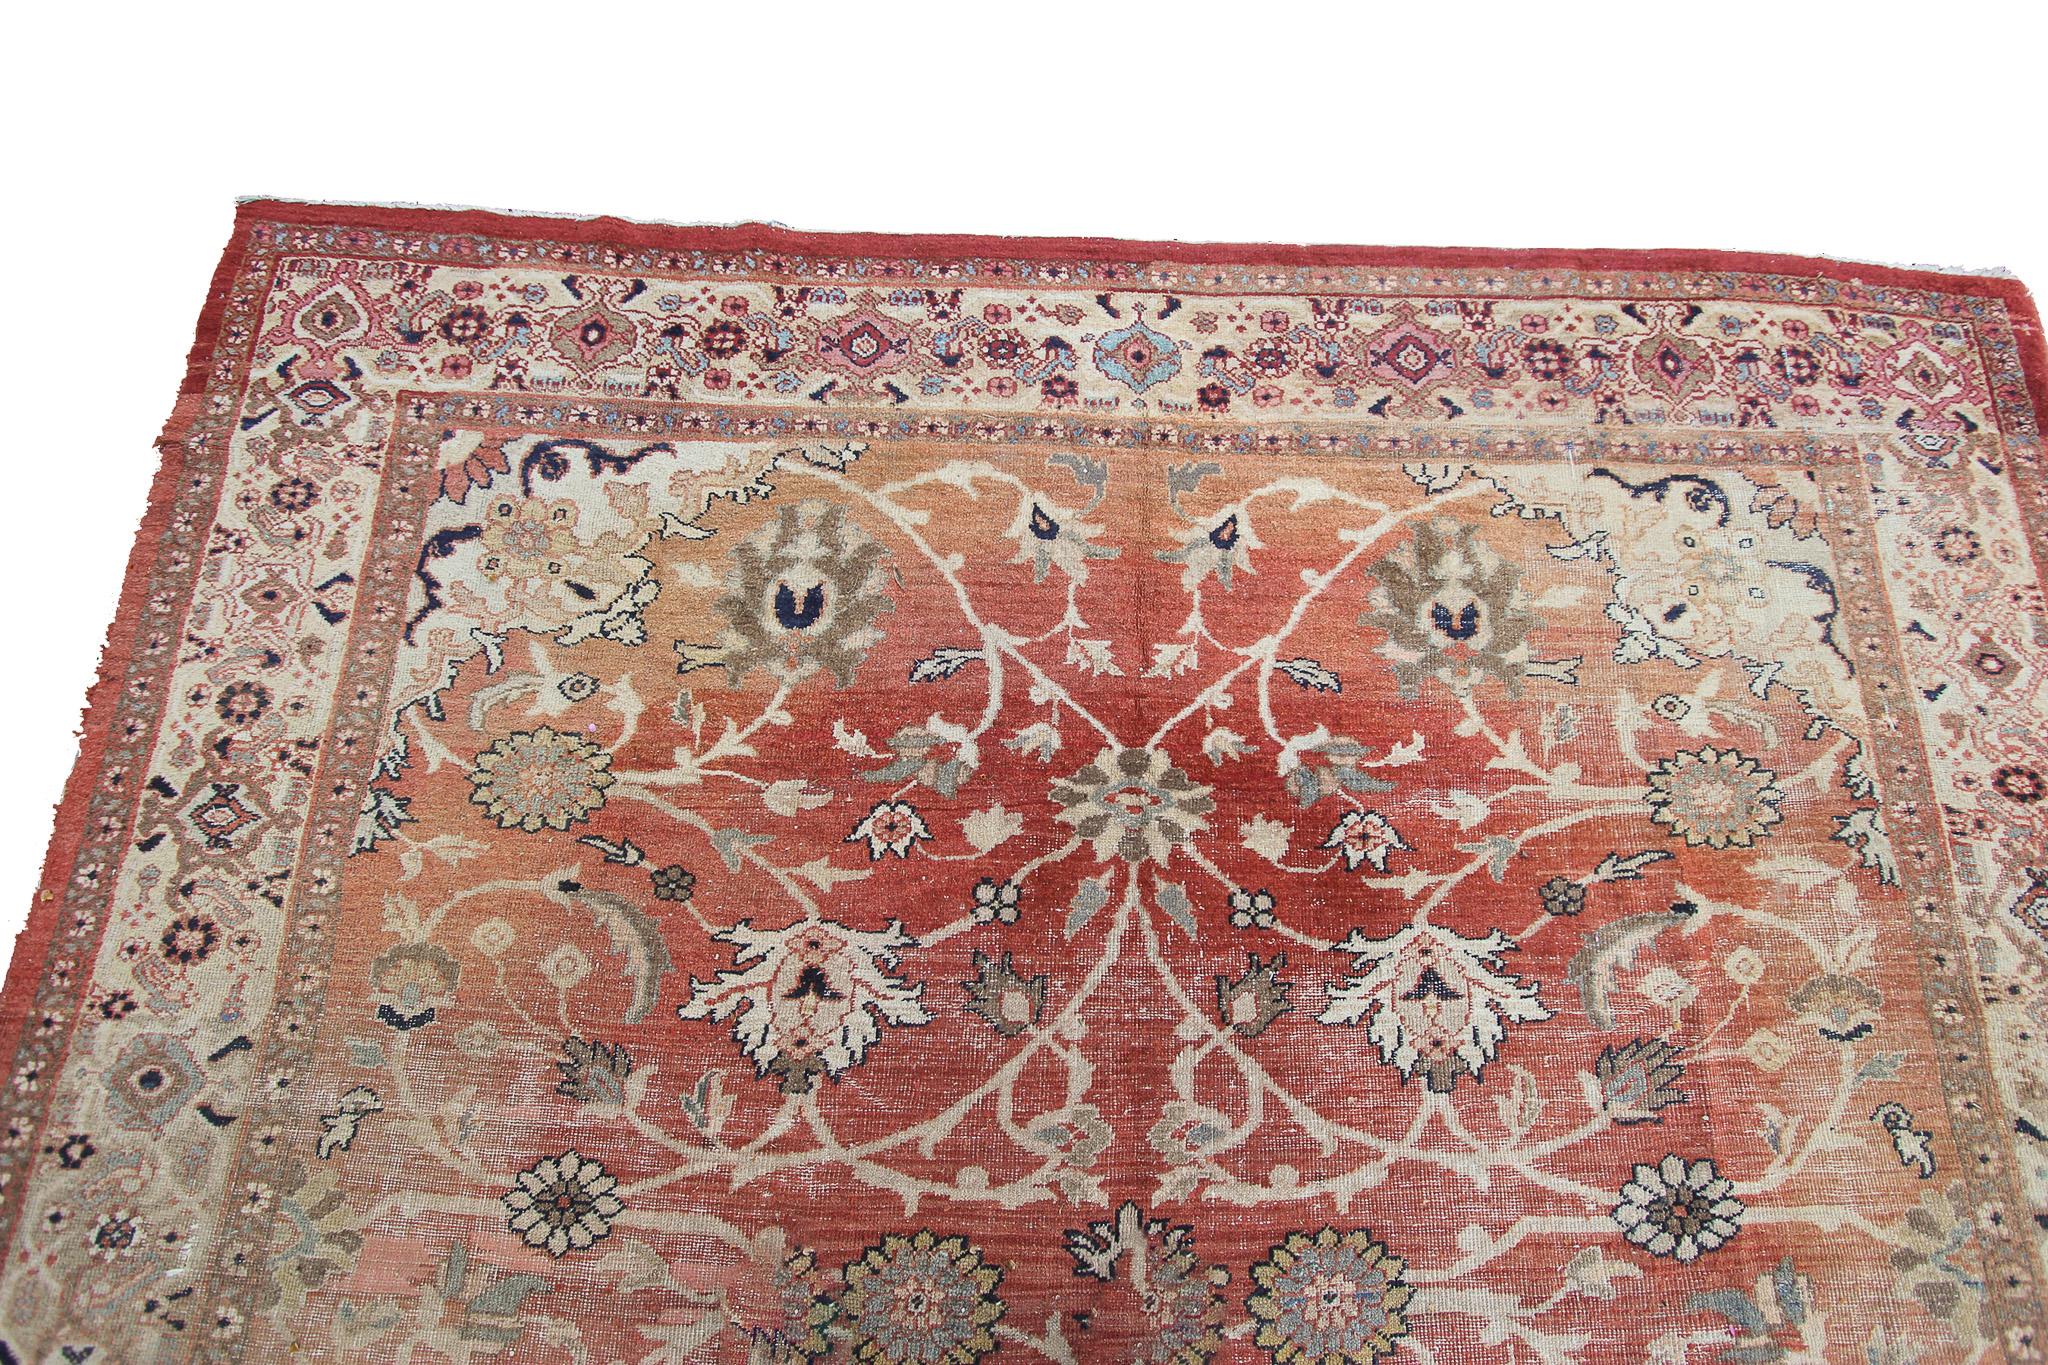 Early 20th Century Large Antique Persian Sultanabad Rug Antique Mahal Geometric, 1900 For Sale